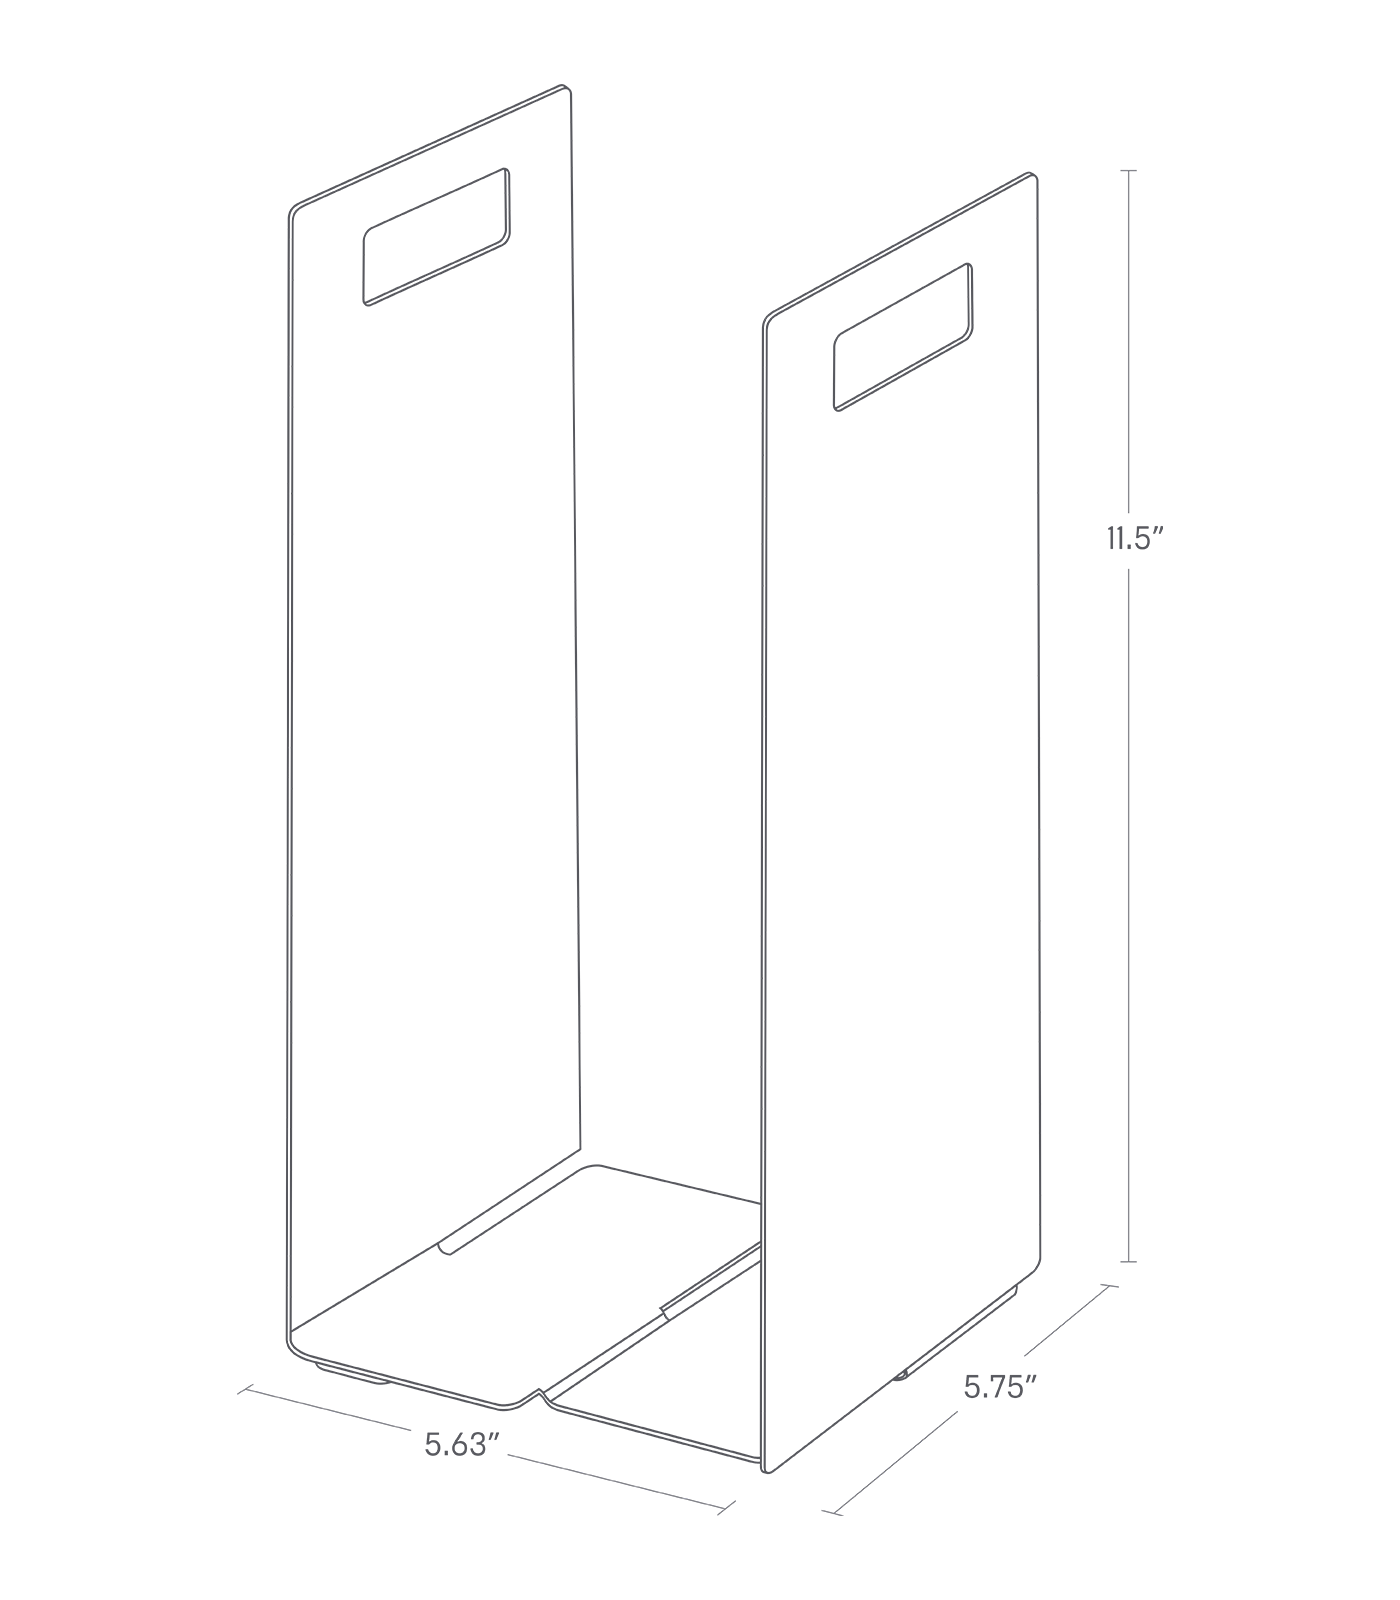 Dimenision image for Towel Storage Organizeron a white background showing total width of 5.63